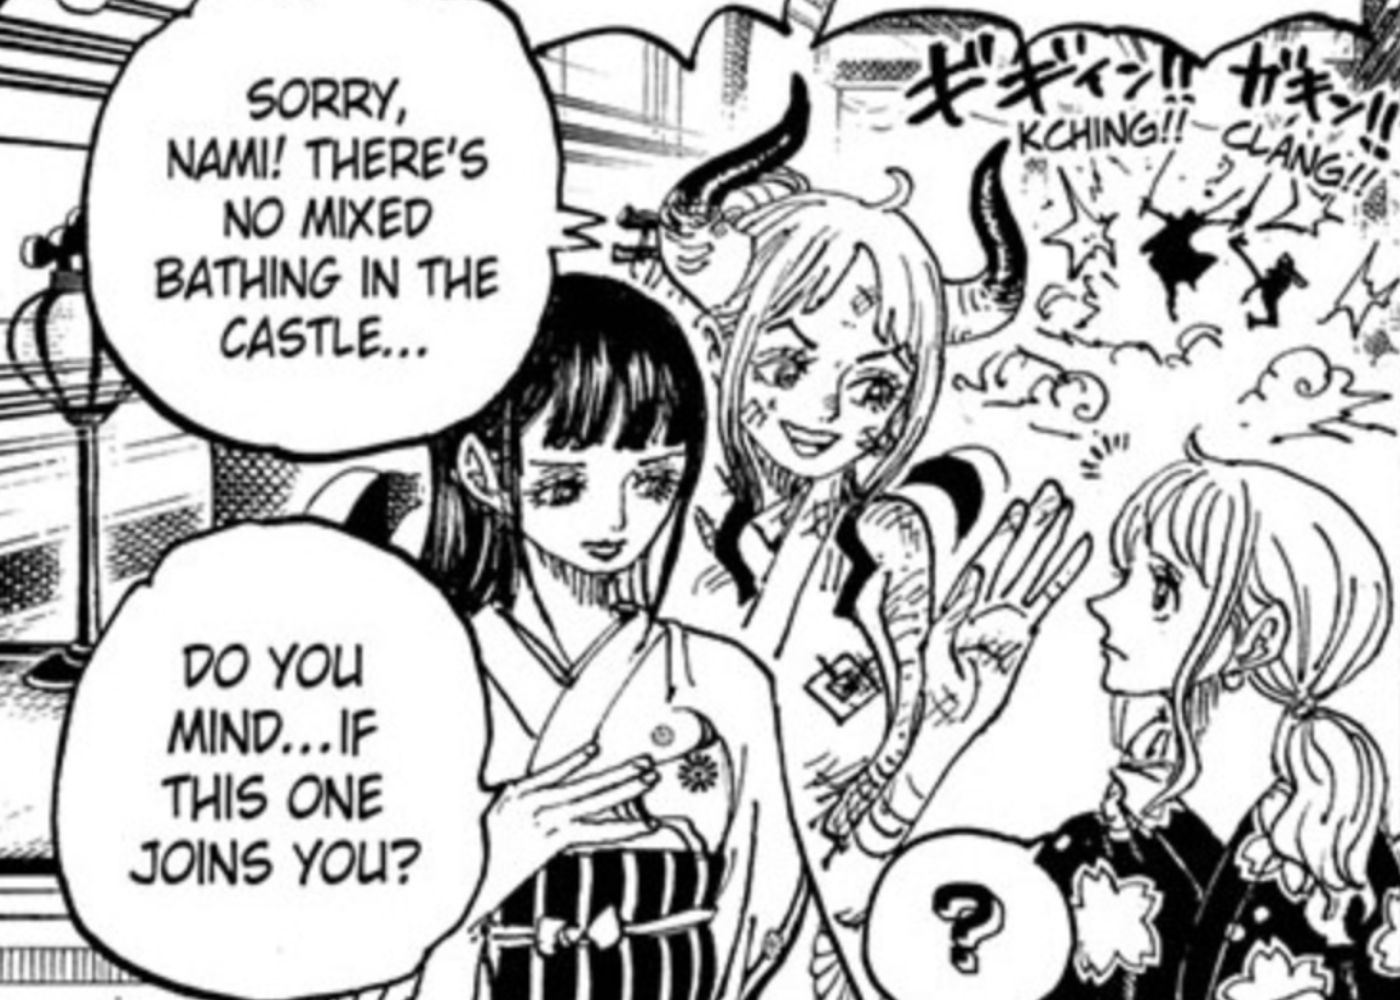 One Piece's Yamato won't join Nami for a bath.